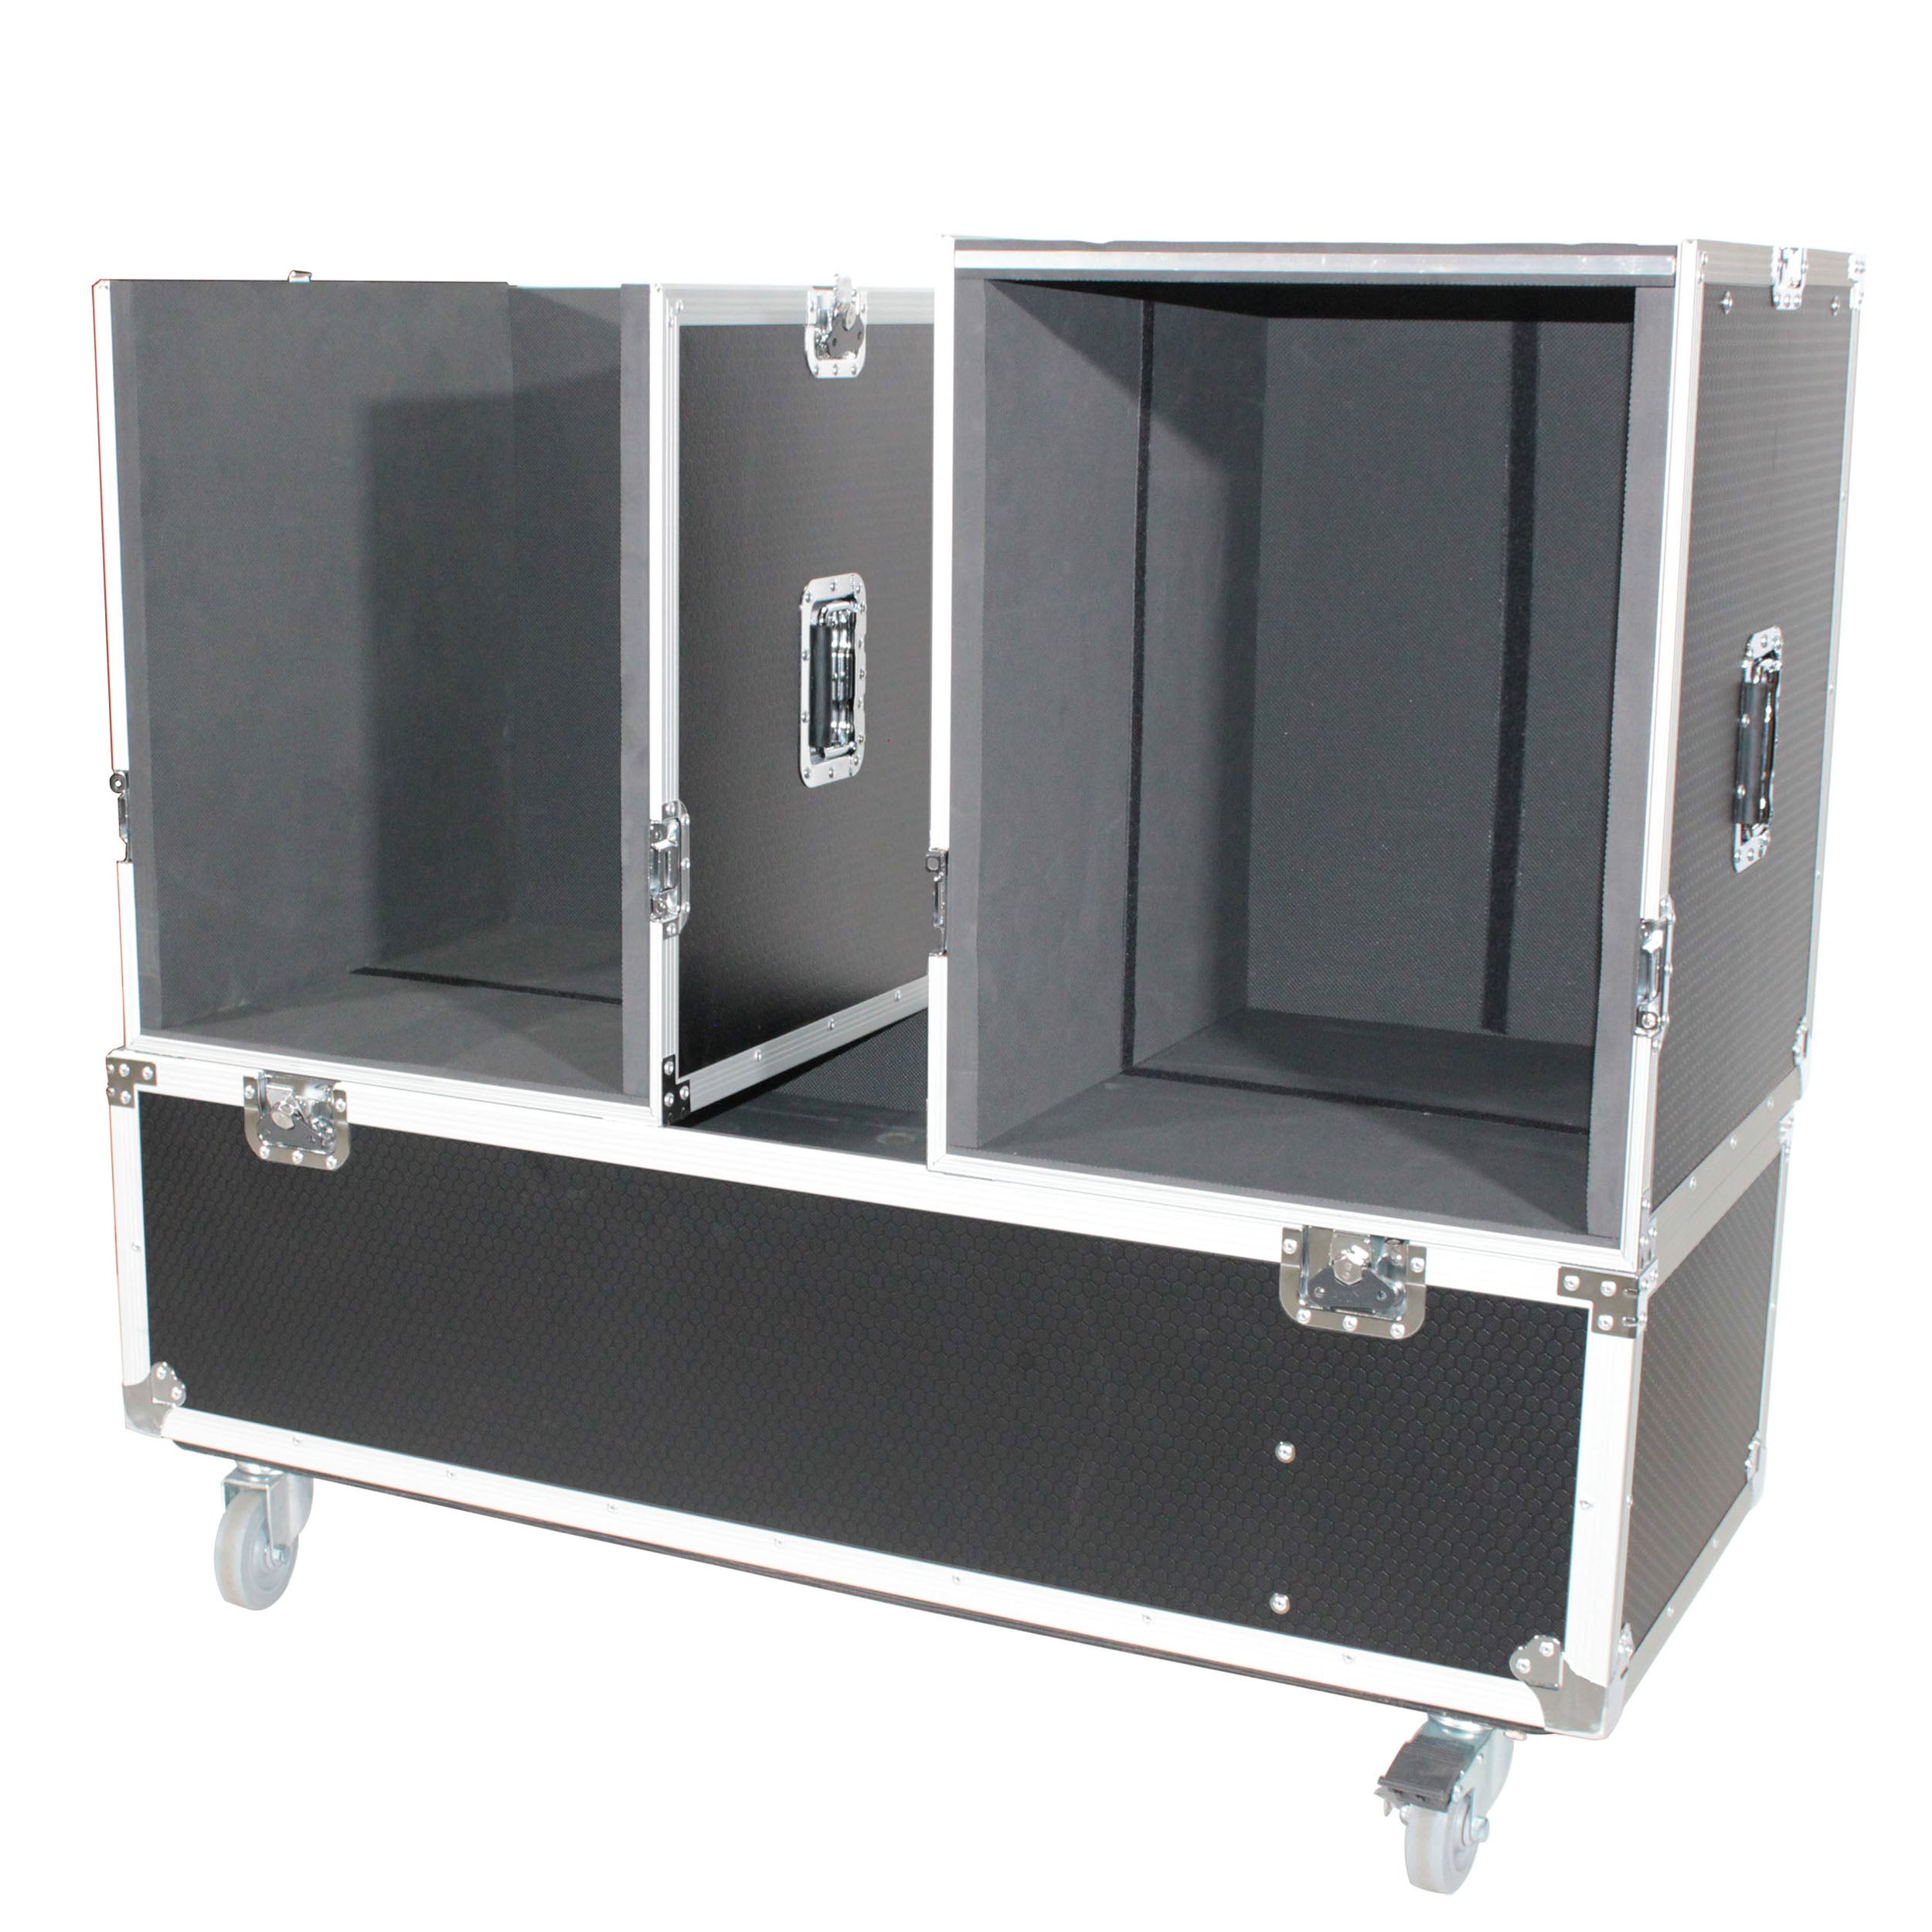 Pro X ATA Flight Case for 2x RCF EVOX12 or EV Evolve 50 Compact Arrays Fits Two Speakers and Subwoofers X-EVO1250X2W